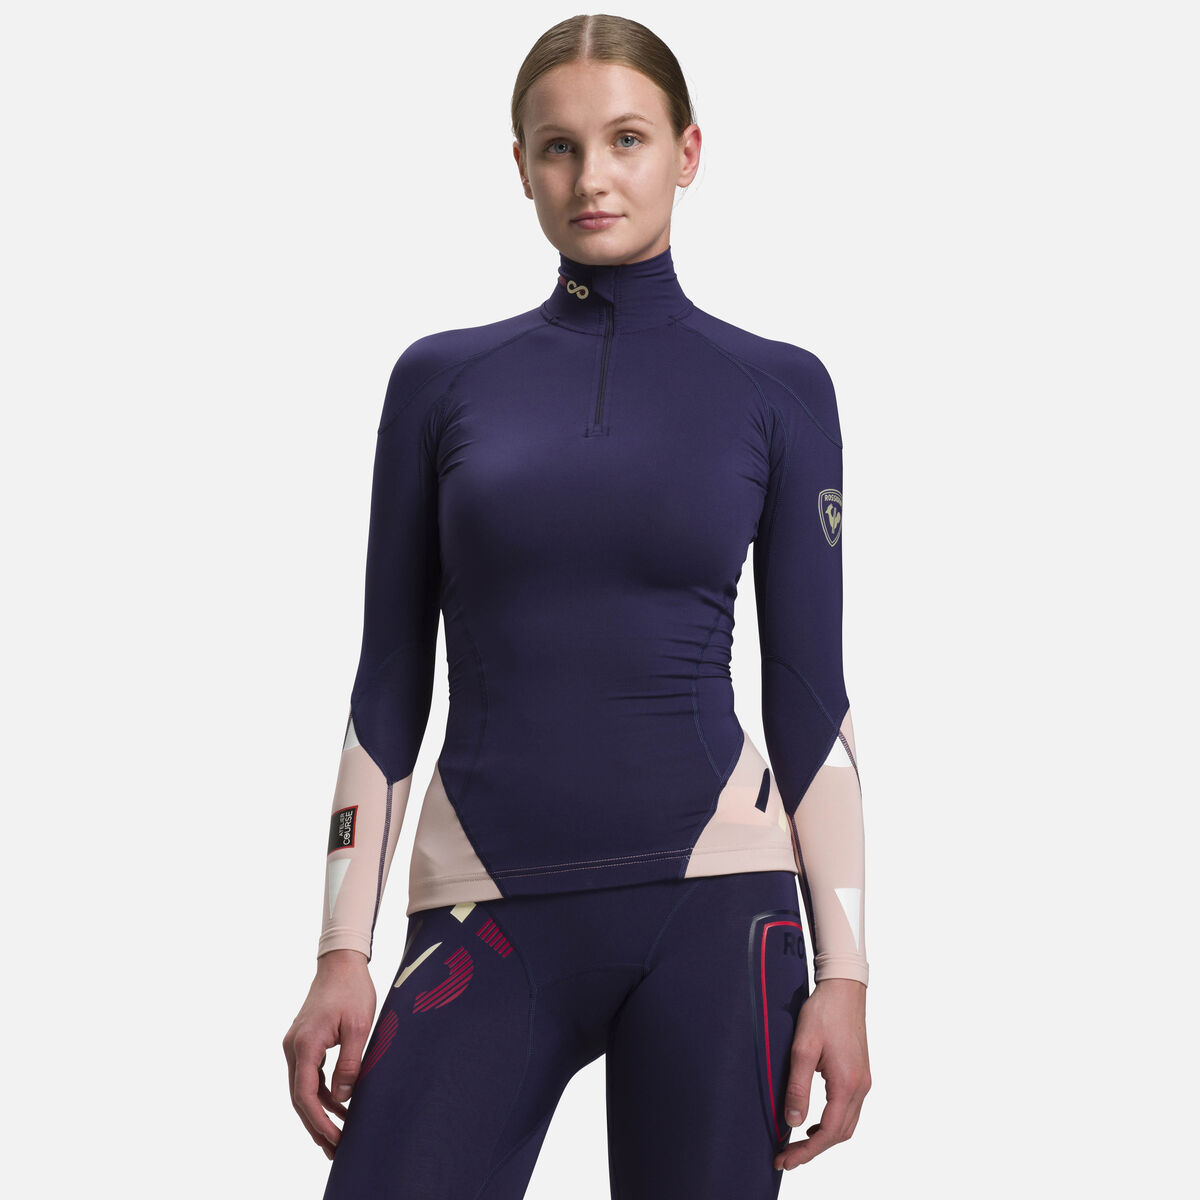 Rossignol Infinite Compression Race Top Thermal T-Shirt, Women